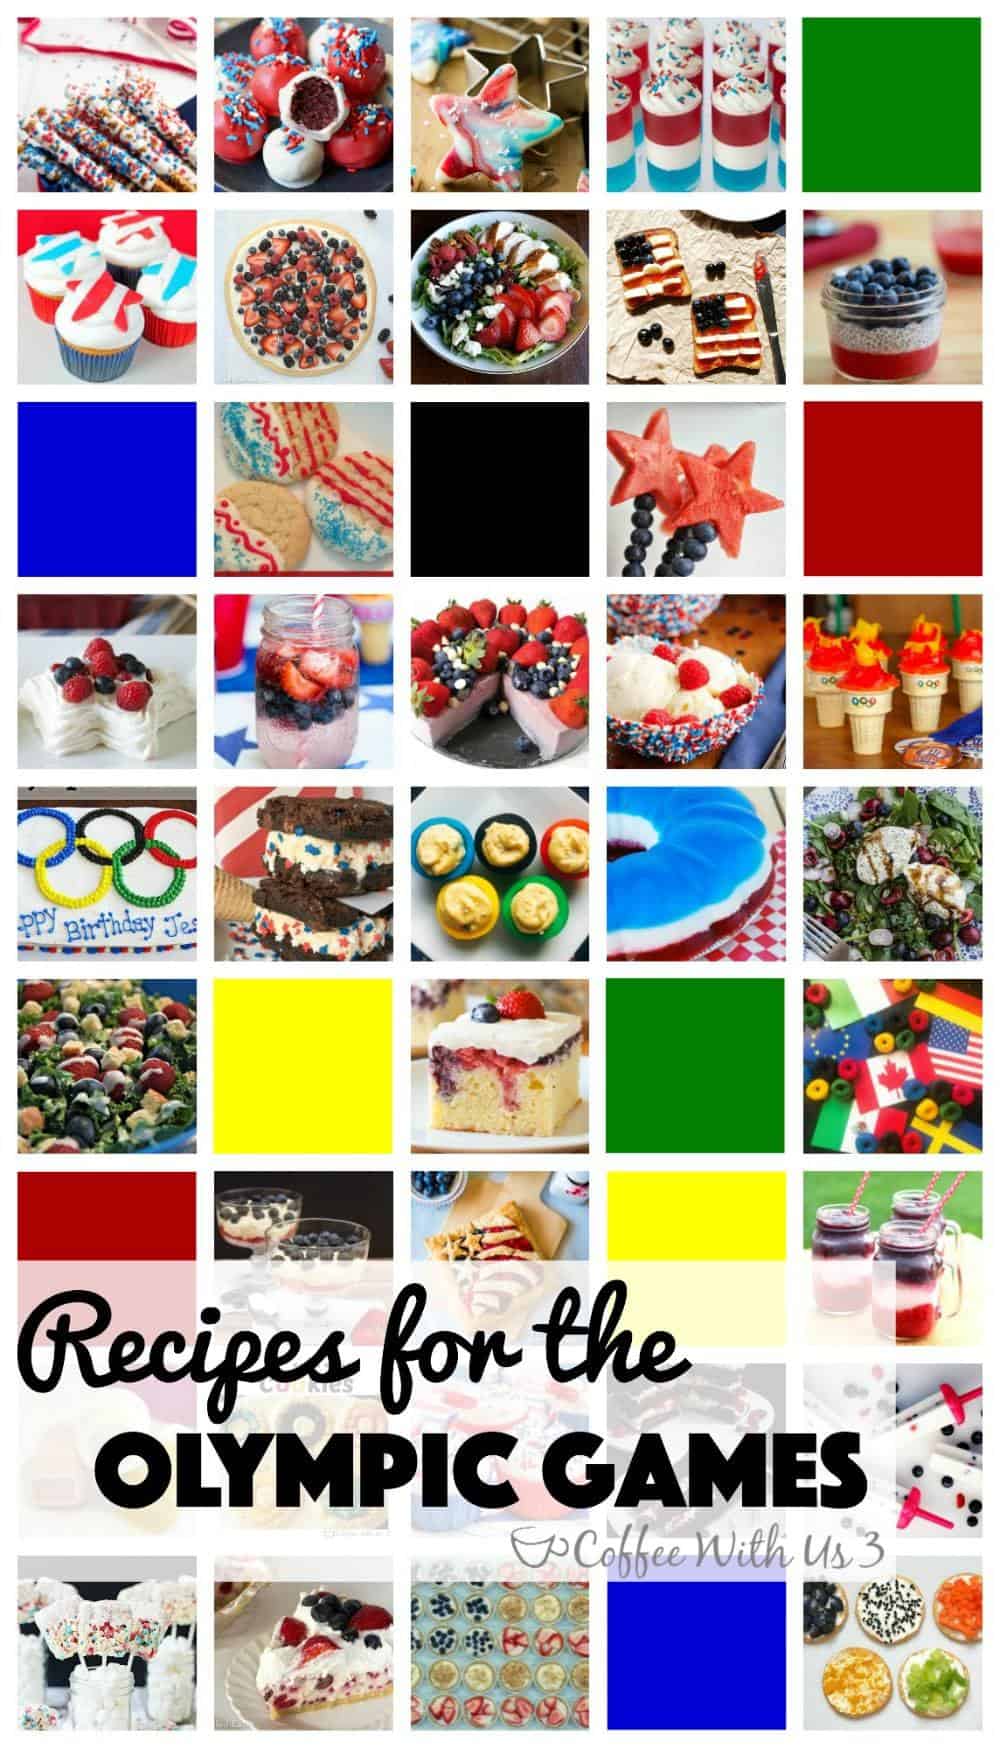 Enhance your Olympic games viewing by adding in some fun festive recipes for the Olympics! From cakes to salads to breakfast to drinks, and so much more!